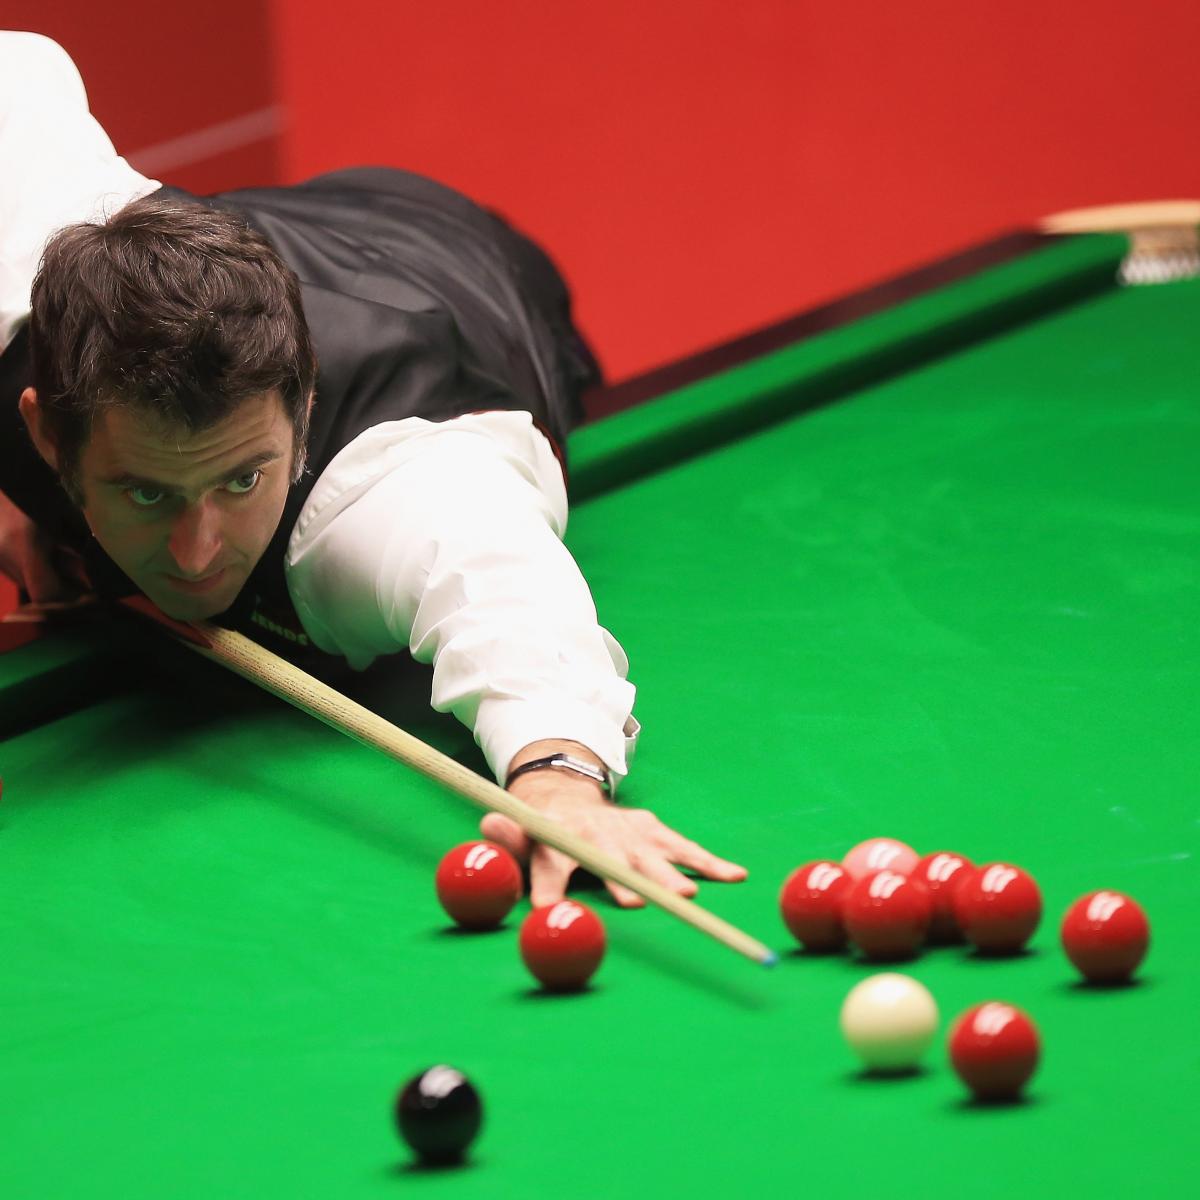 World Snooker Championship 2014: Round 2 Scores, Results, Fixtures and